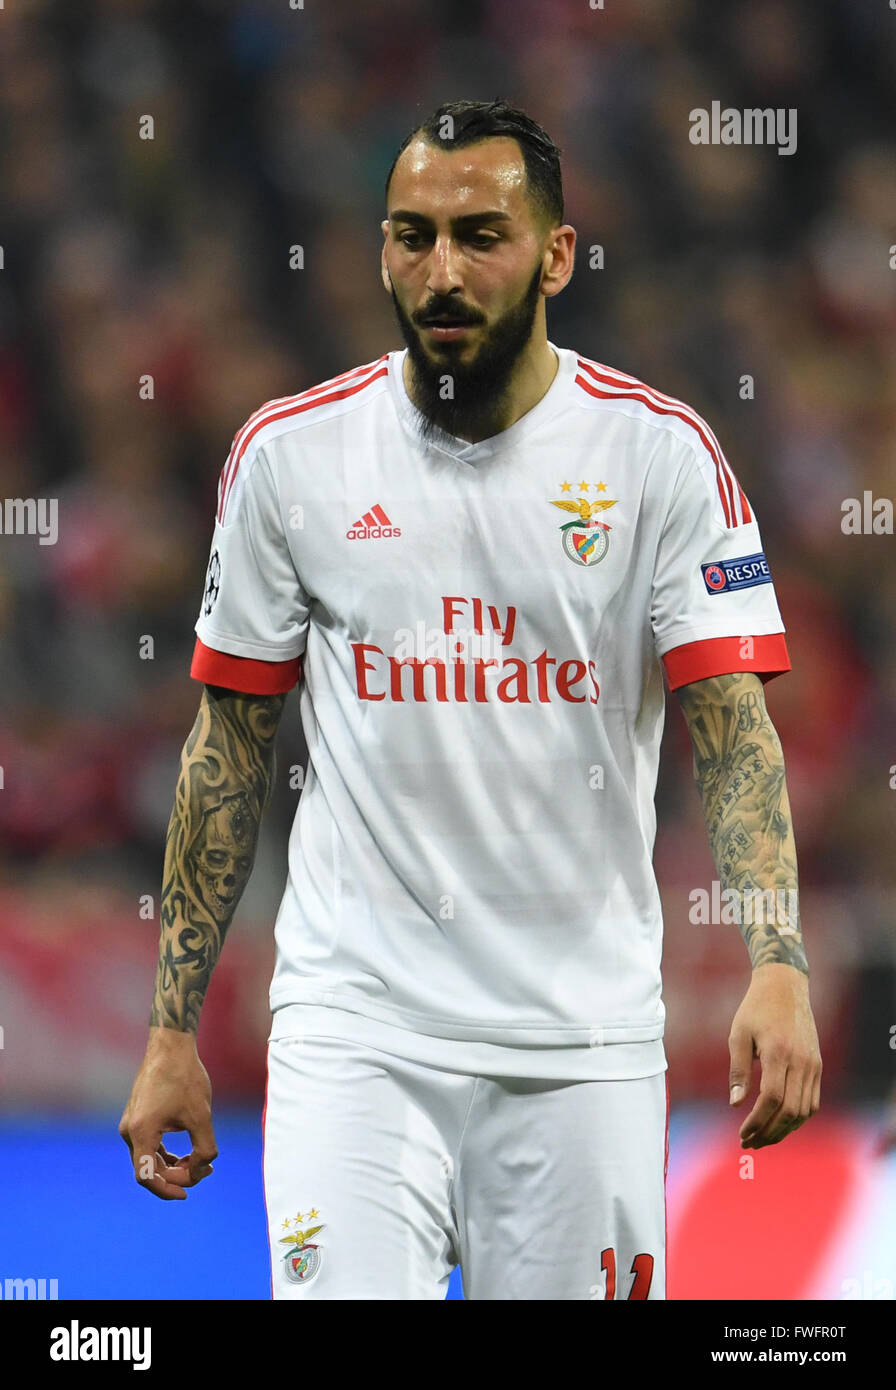 Lisboa's Kostas Mitroglou in action during the Champions League quarter finals first leg soccer match between Bayern Munich and S.L. Benfica at Allianz Arena in Munich, Germany, 5 April 2016. PHOTO: ANDREAS GEBERT/dpa Stock Photo